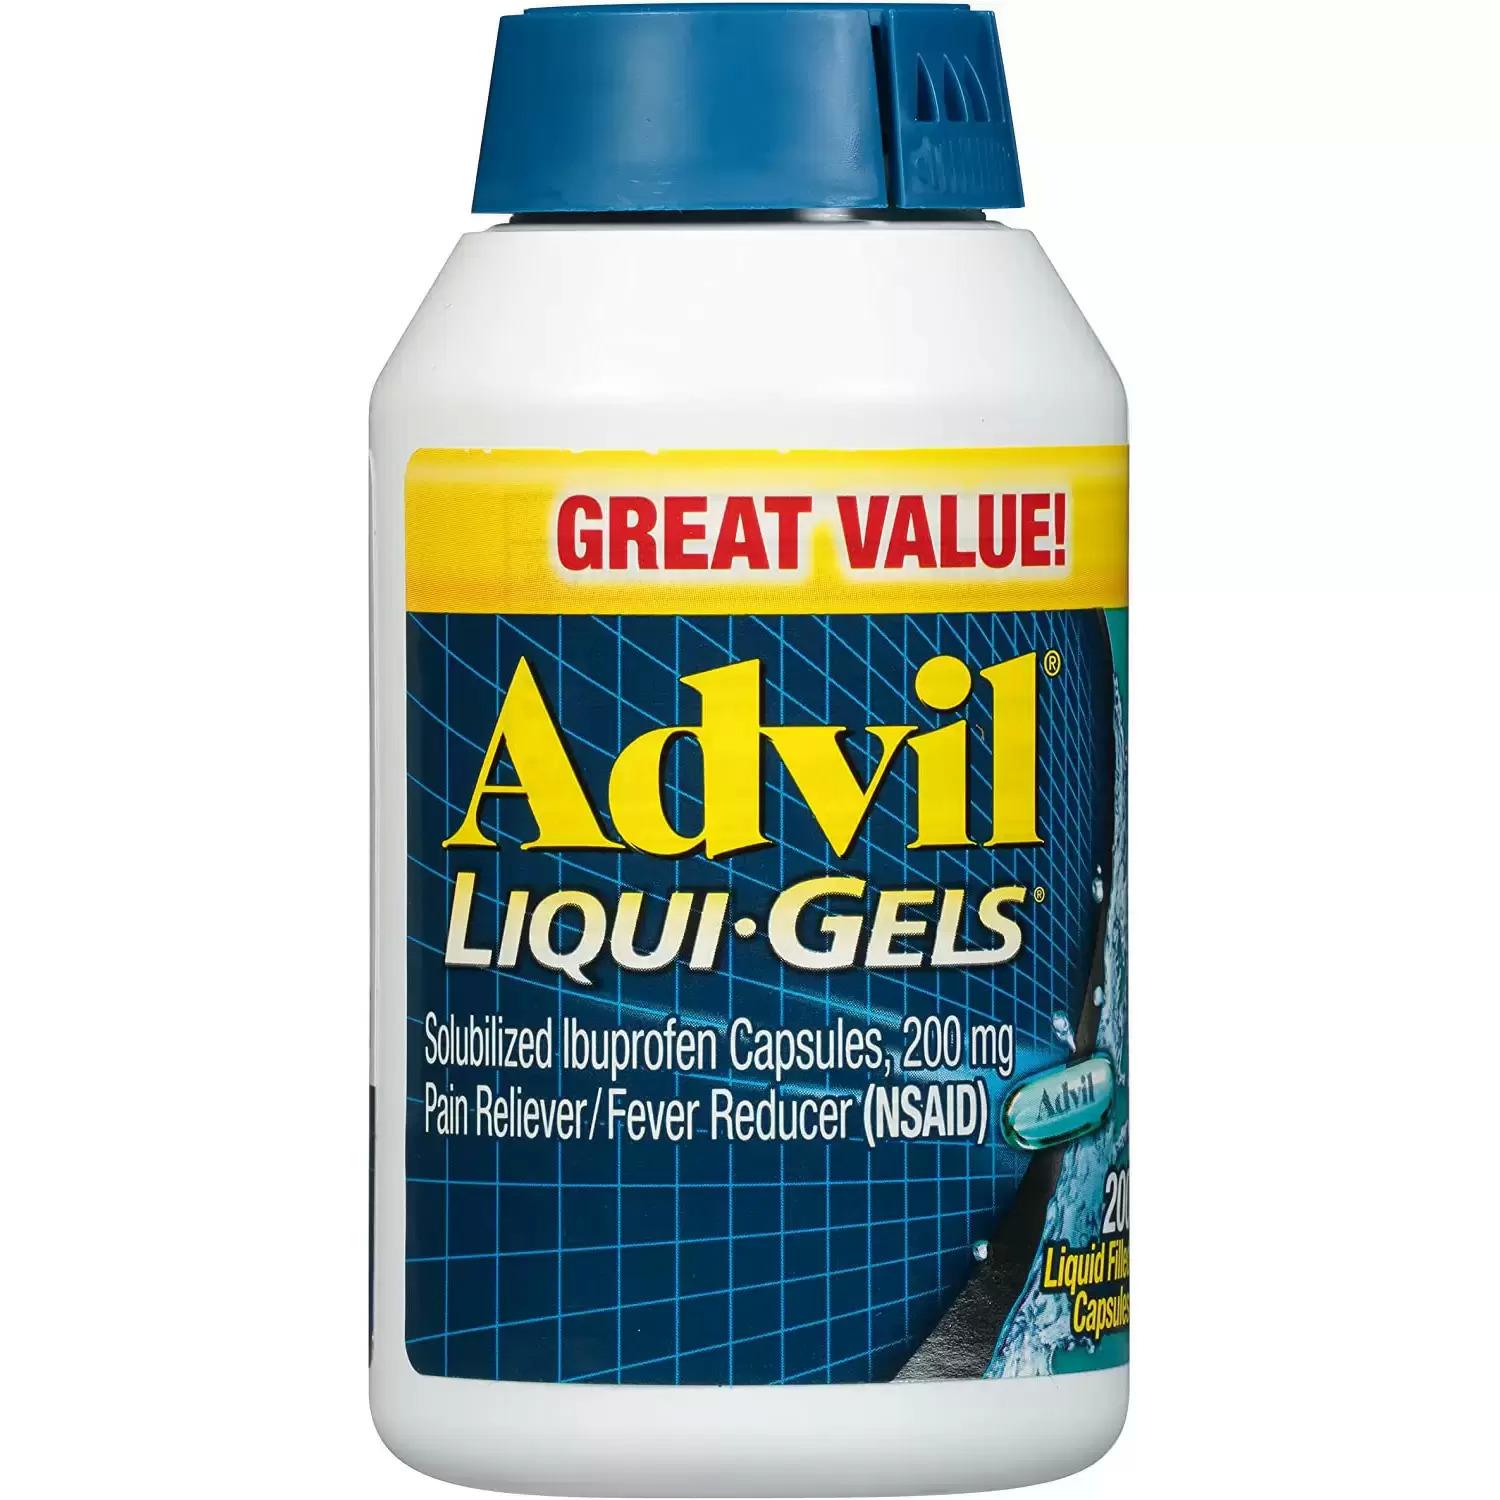 200 Advil Pain Reliever and Fever Reducer Liqui-Gels for $9.68 Shipped